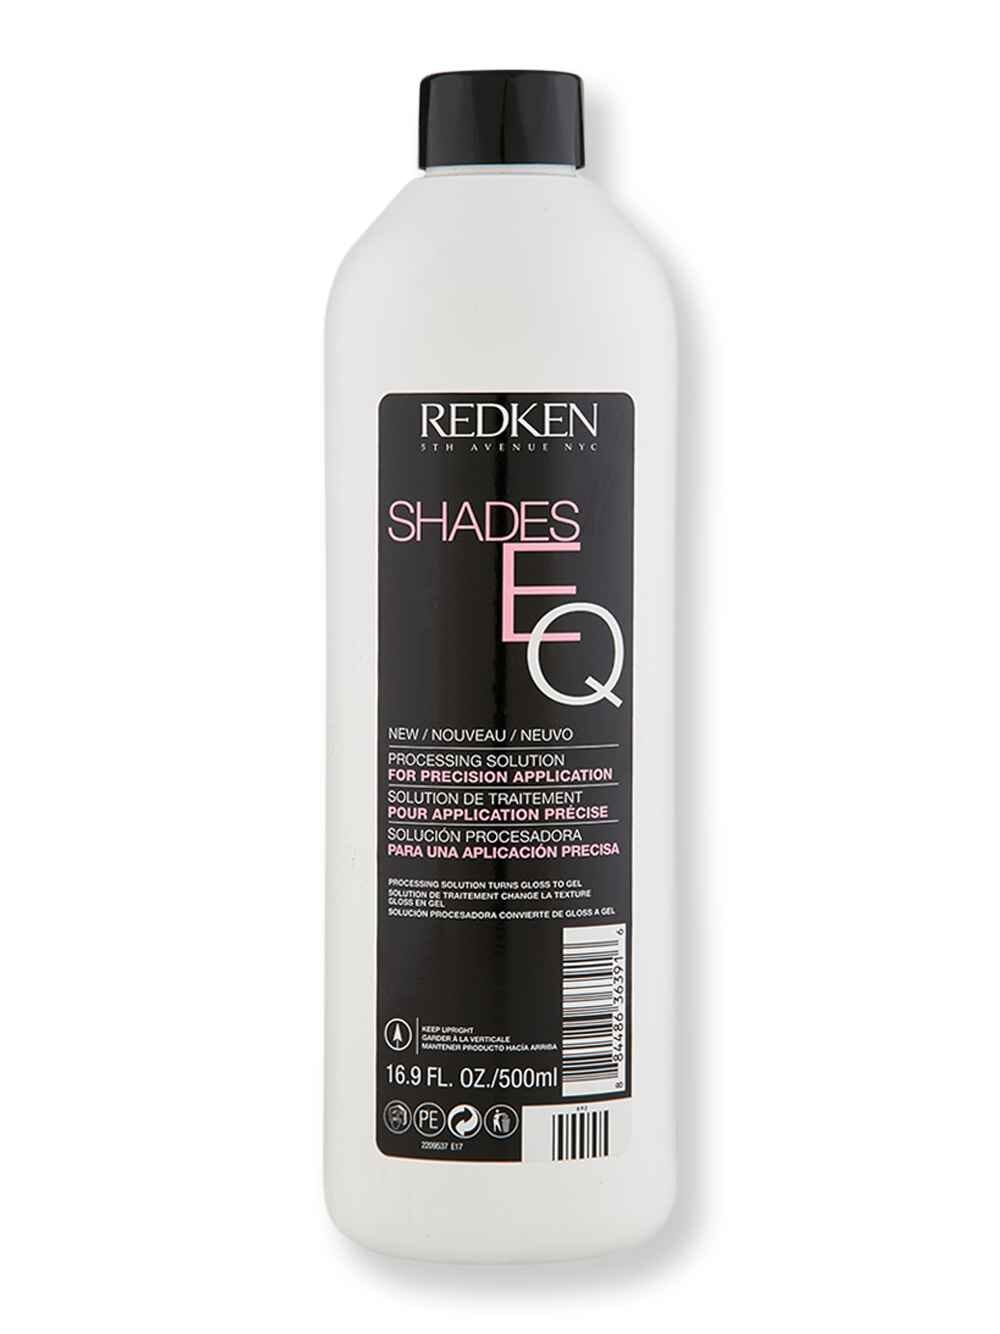 Redken Redken Shades EQ Gloss to Gel Processing Solution 16.9 oz Hair Color 